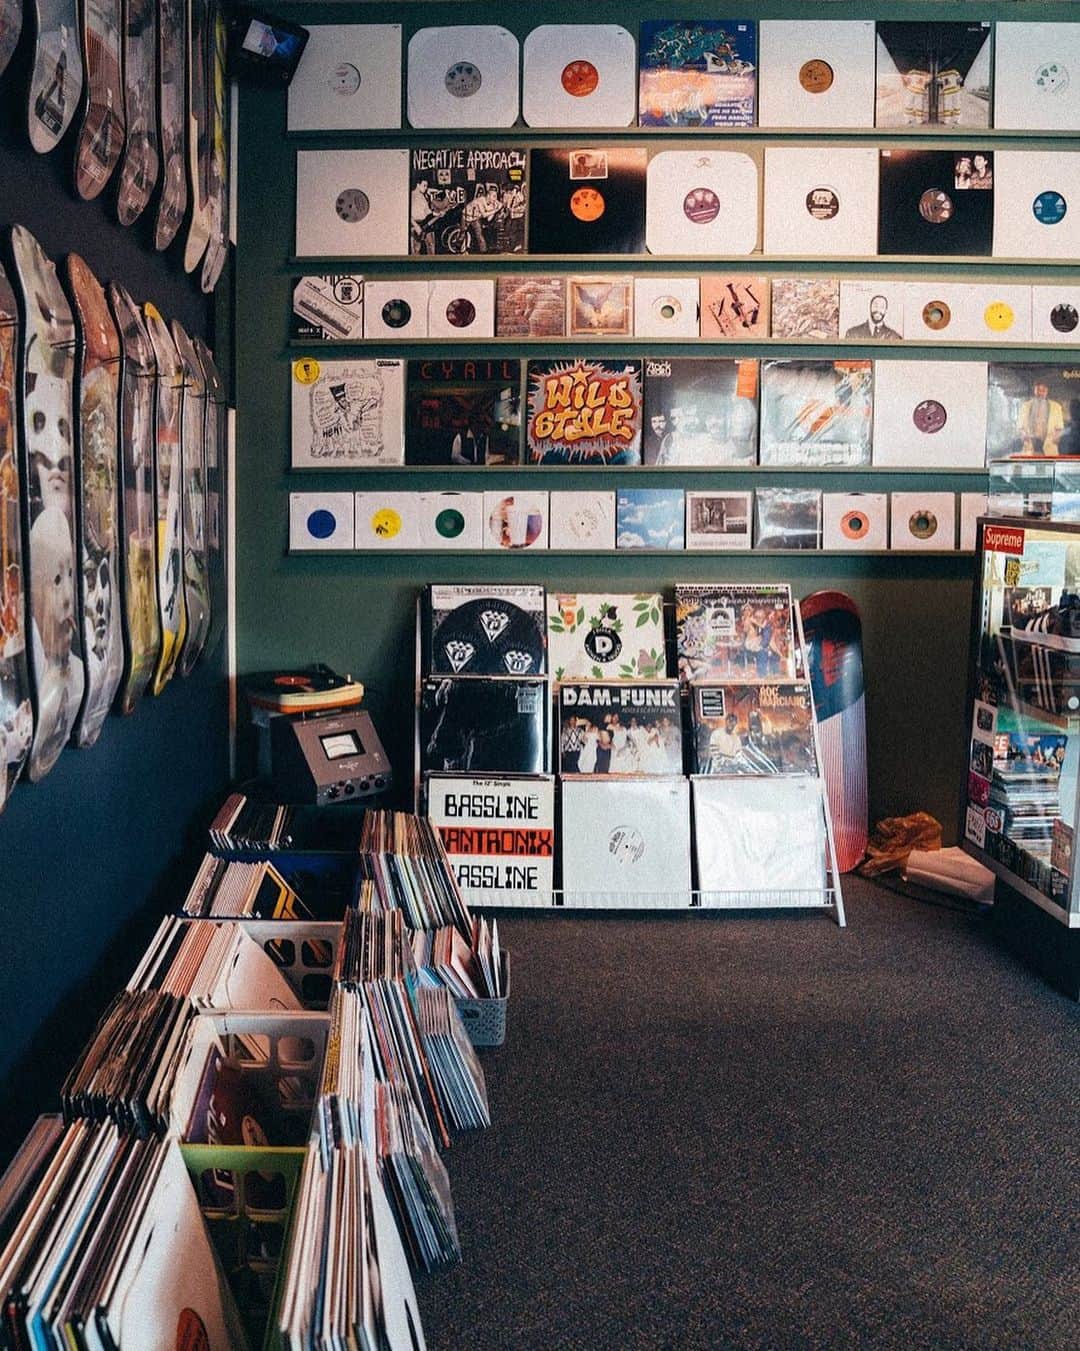 Red Bull Music Academyのインスタグラム：「Technical Equipment Supply ⠀⠀⠀⠀⠀⠀⠀⠀⠀ Based in the small town of Ypsilanti, some 35 miles west of Detroit, Technical Equipment Supply has become an unlikely destination for vinyl hunters. That's in no small part because its owner, Todd Osborn, runs an in-house label with releases by Aphex Twin, Madlib and Underground Resistance that can only be purchased in store. ⠀⠀⠀⠀⠀⠀⠀⠀⠀ #TechnicalEquipmentSupply #RecordStore #RecordShop #RecordCollector #VinylRecords #RBMA ⠀⠀⠀⠀⠀⠀⠀⠀⠀ 📷: @newyorkcityvibe」